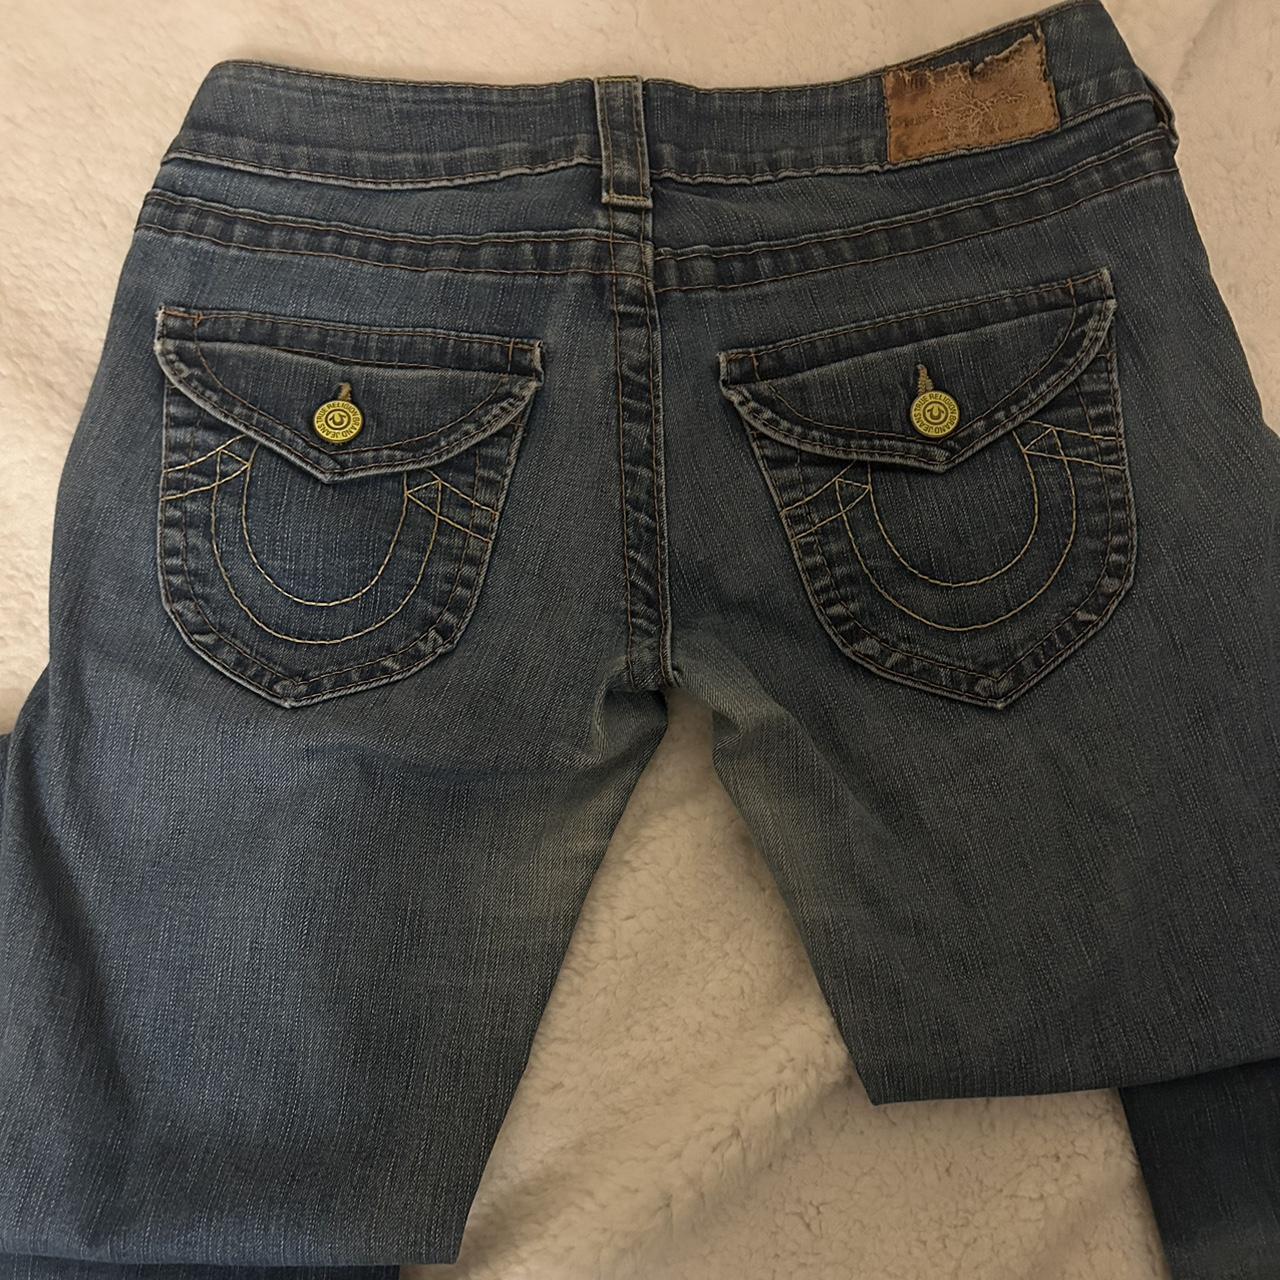 True religion low rise jeans with yellow button - Depop